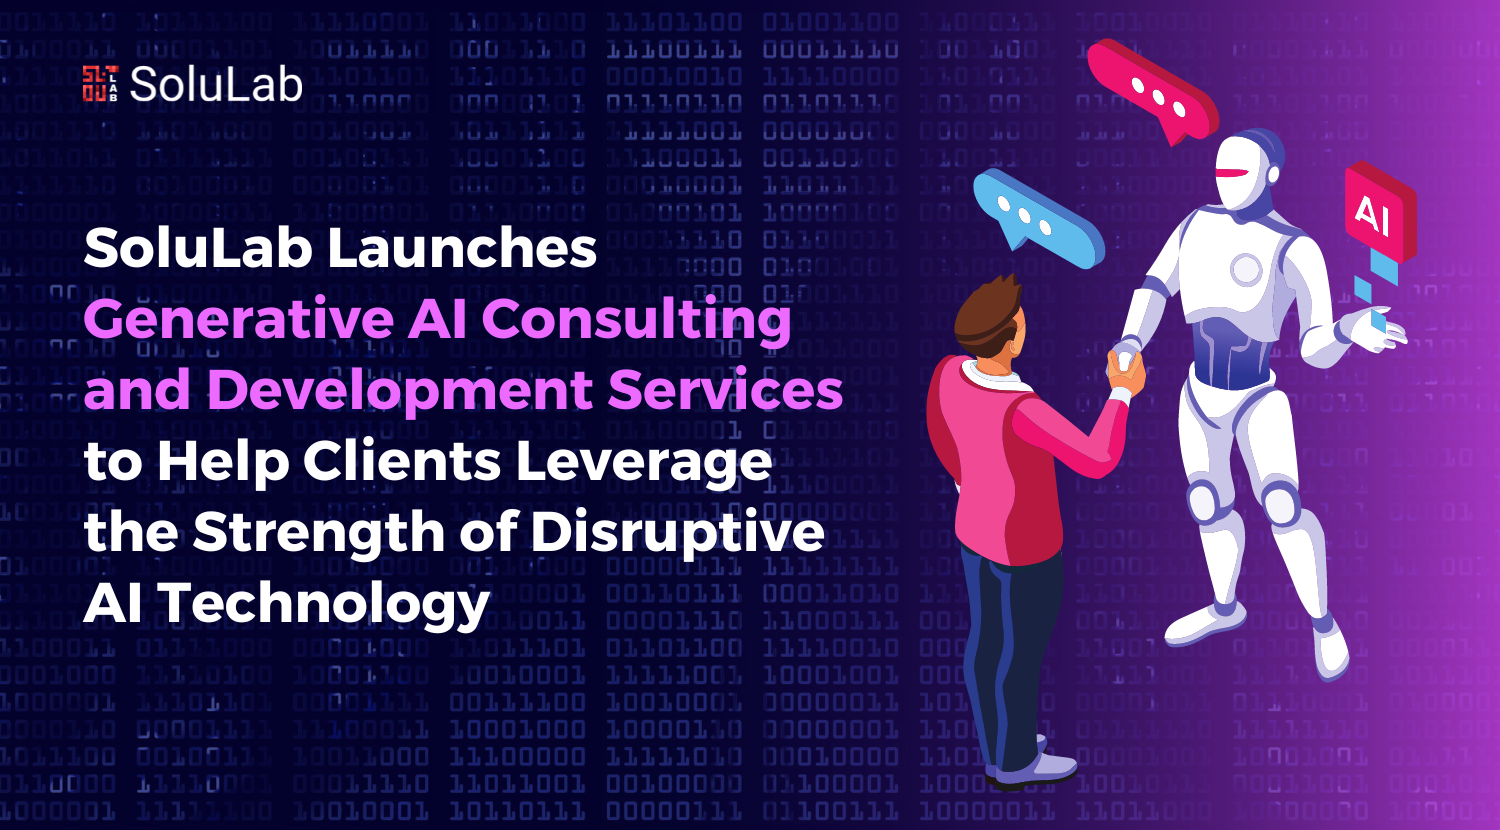 SoluLab Launches Generative AI Consulting and Development Services to Help Clients Leverage the Strength of Disruptive AI Technology